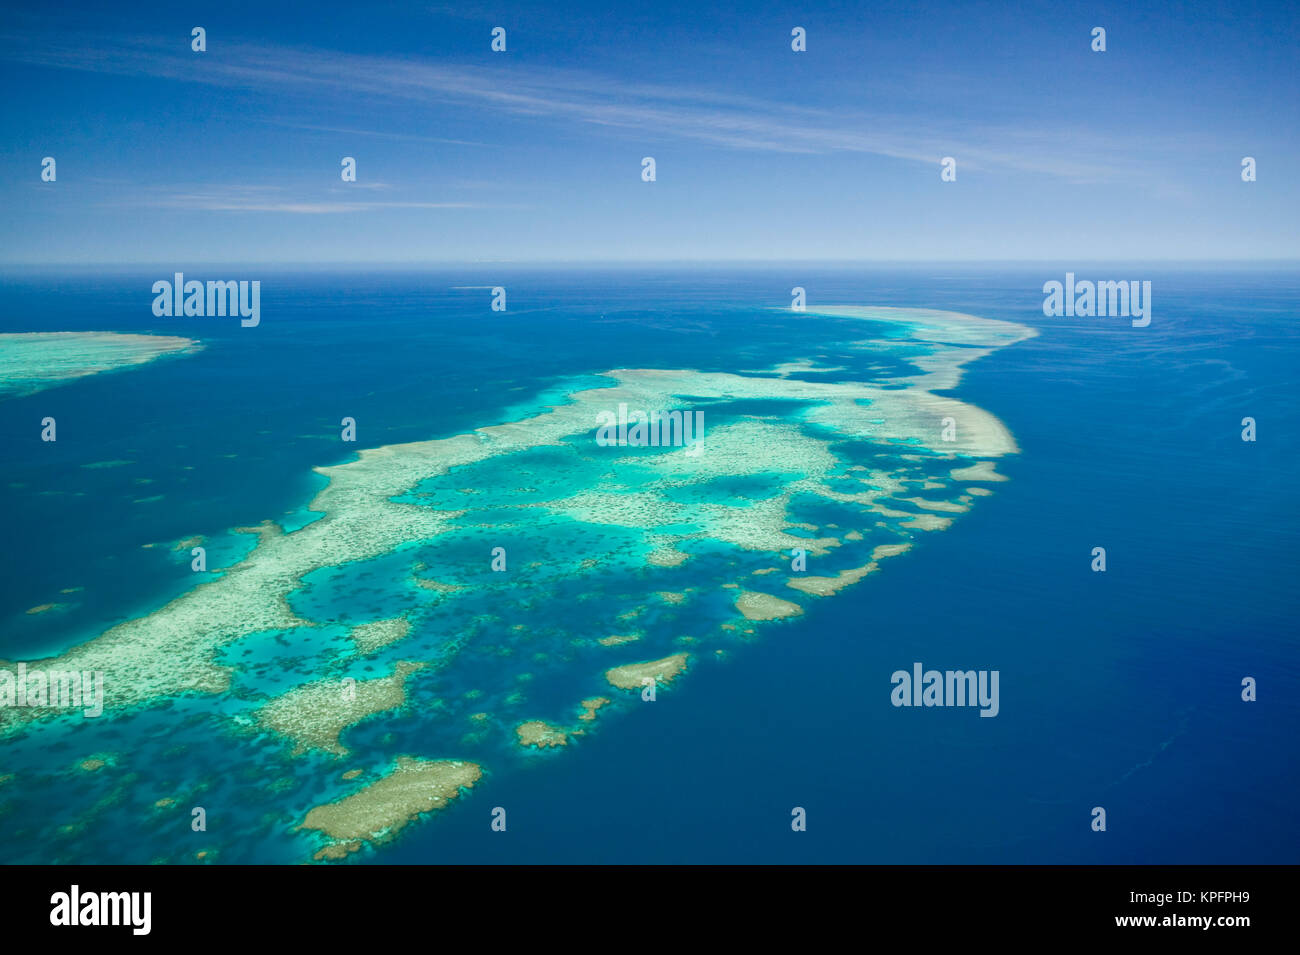 Australia, Queensland, North Coast, Cairns Area. The Great Barrier Reef- Aerial View of Elford Reef. Stock Photo